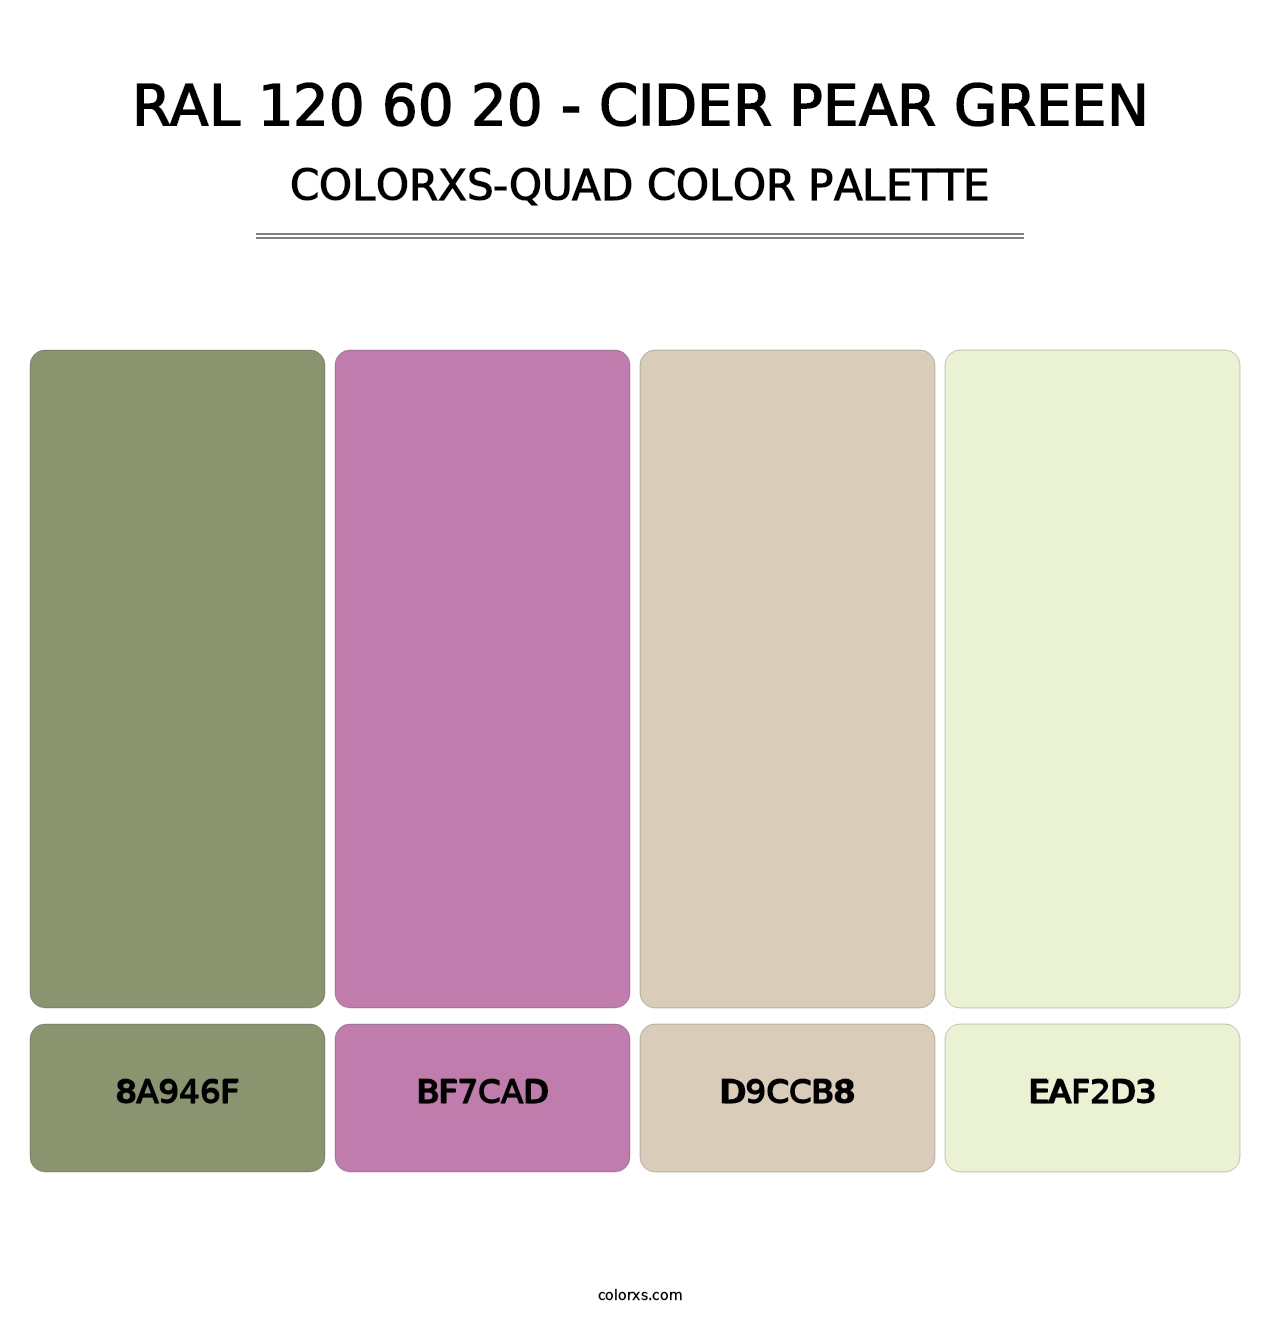 RAL 120 60 20 - Cider Pear Green - Colorxs Quad Palette